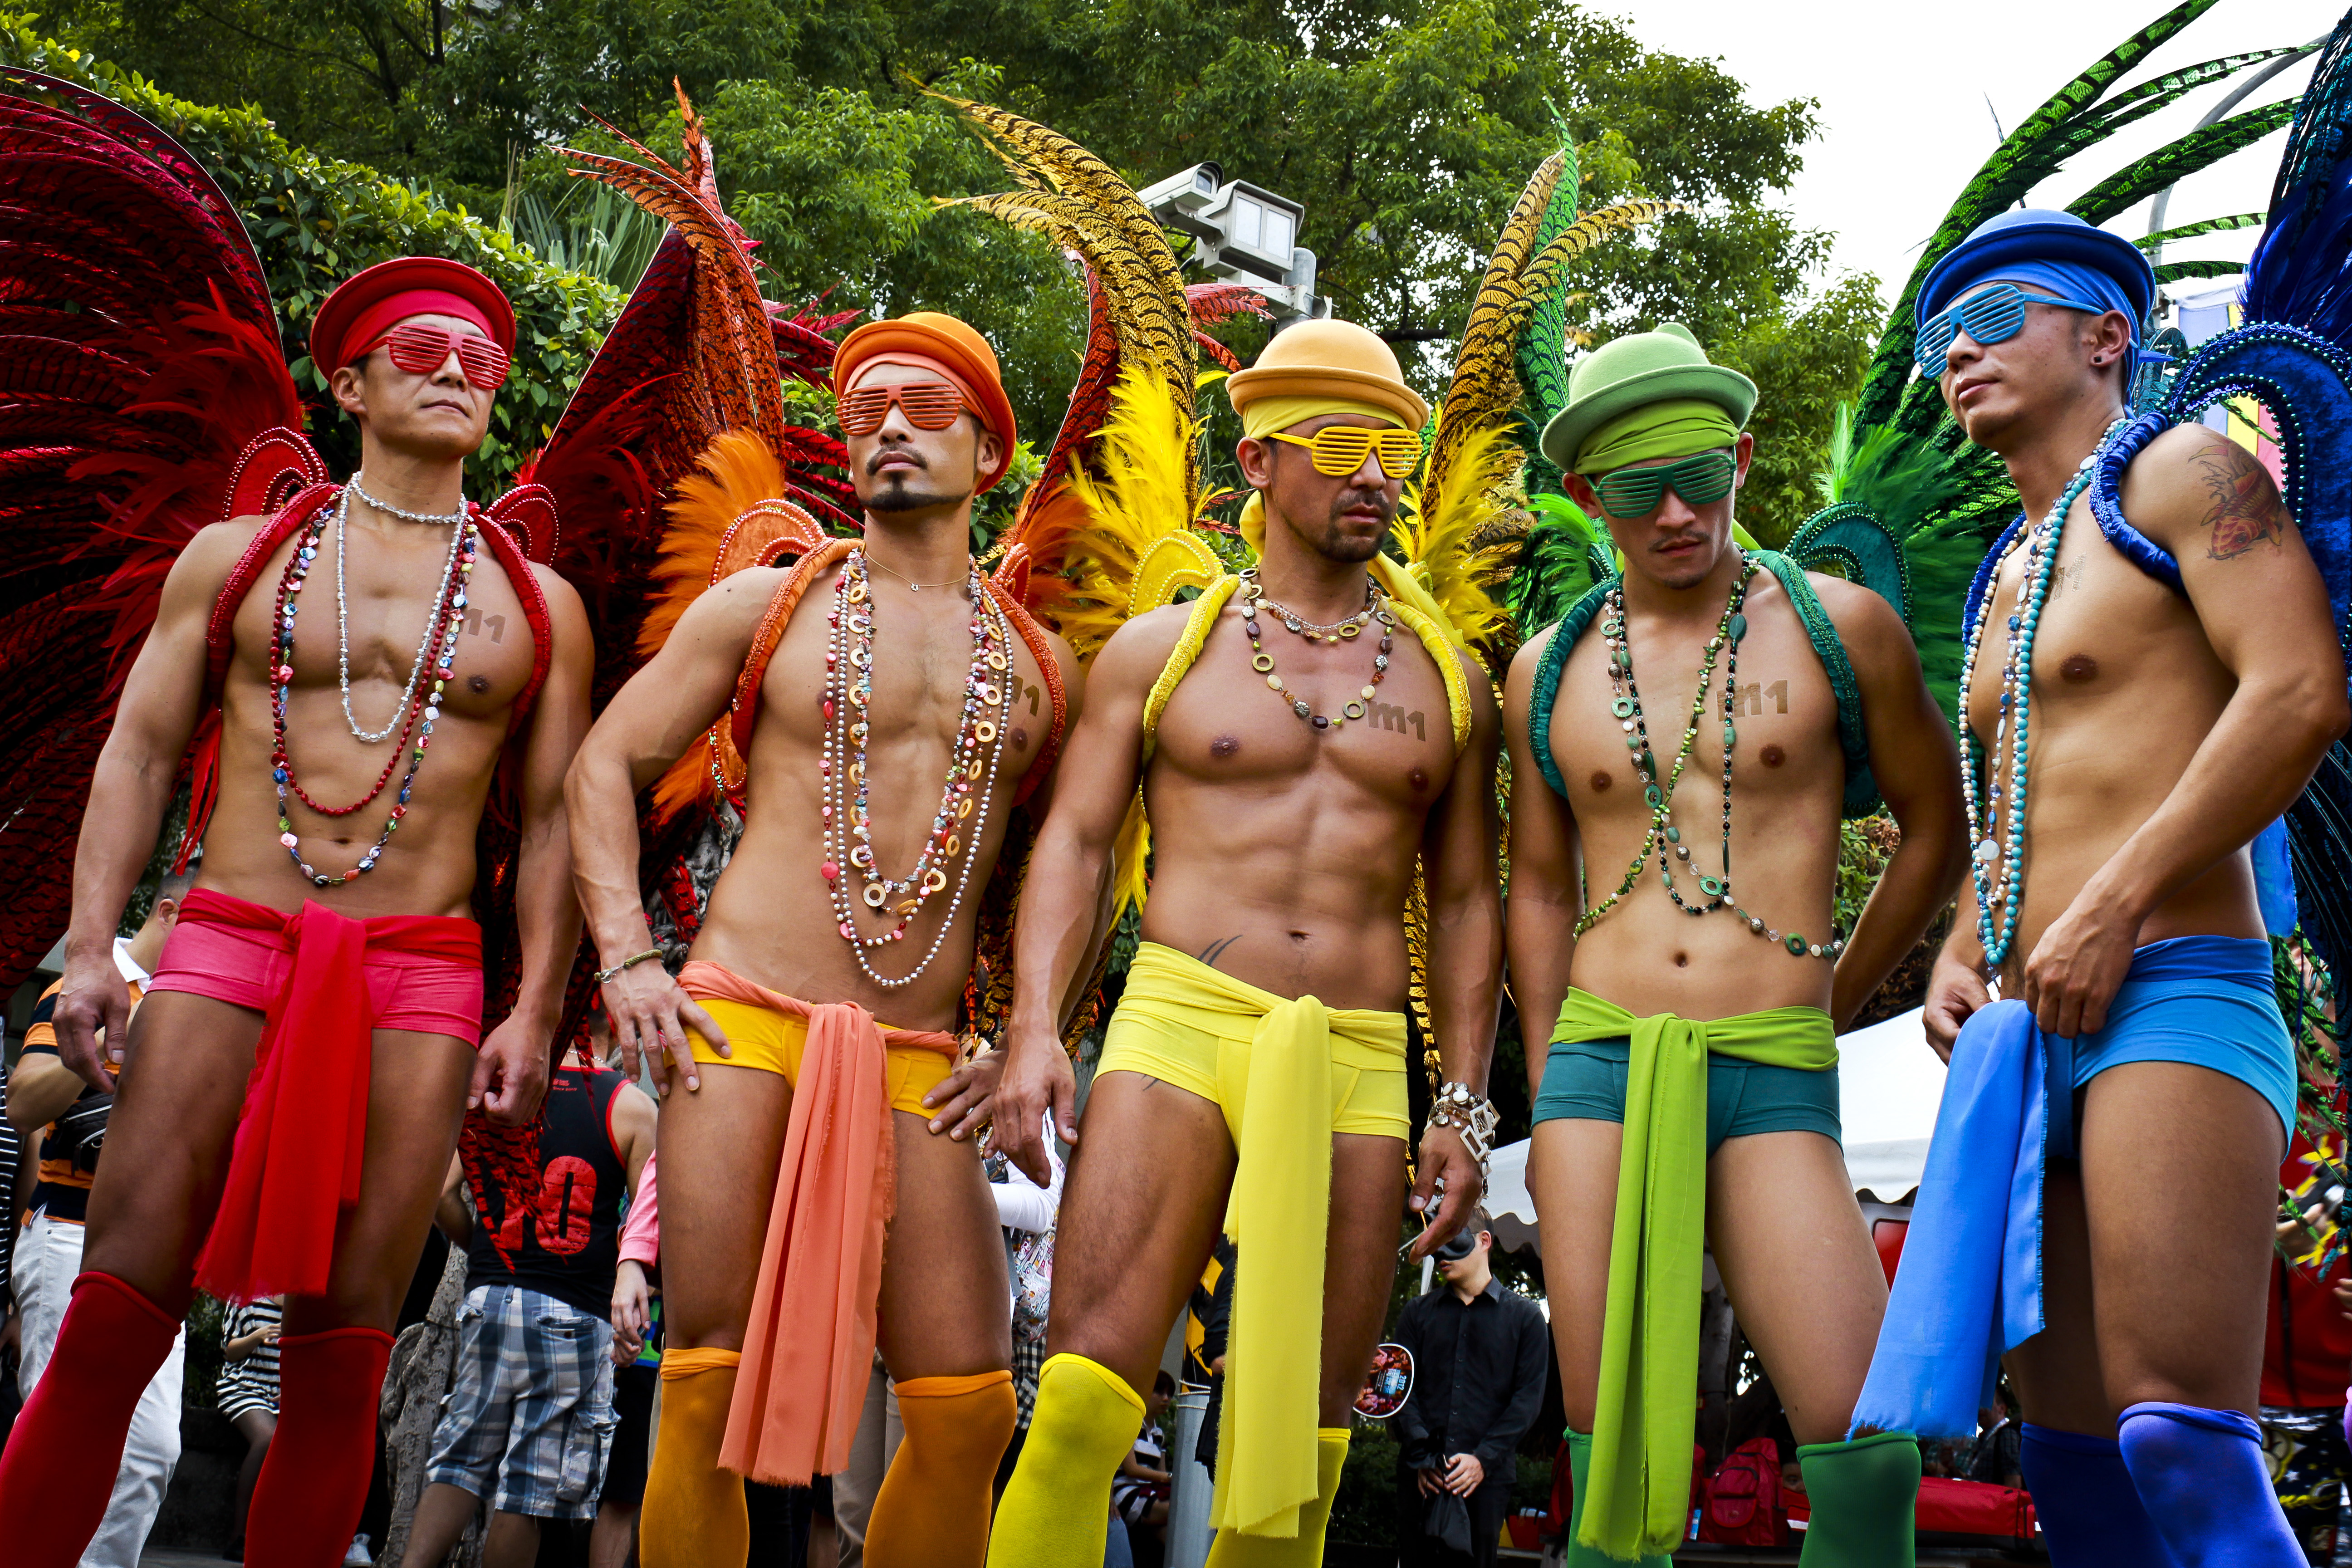 The Biggest Gay Pride Parade You’ve Never Heard of.